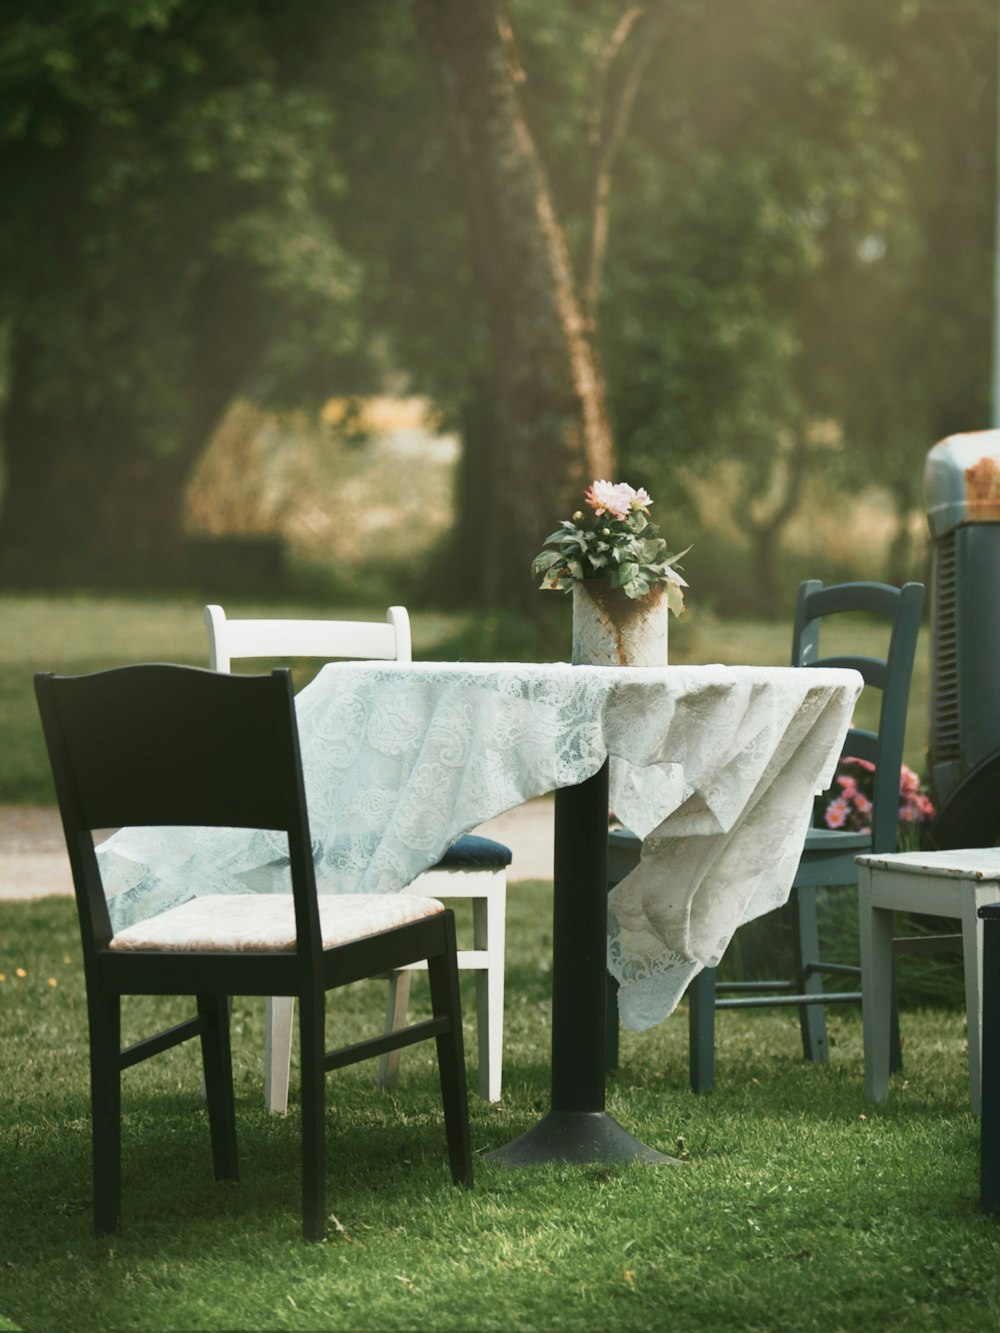 a table and chairs in the grass with a vase of flowers on the table